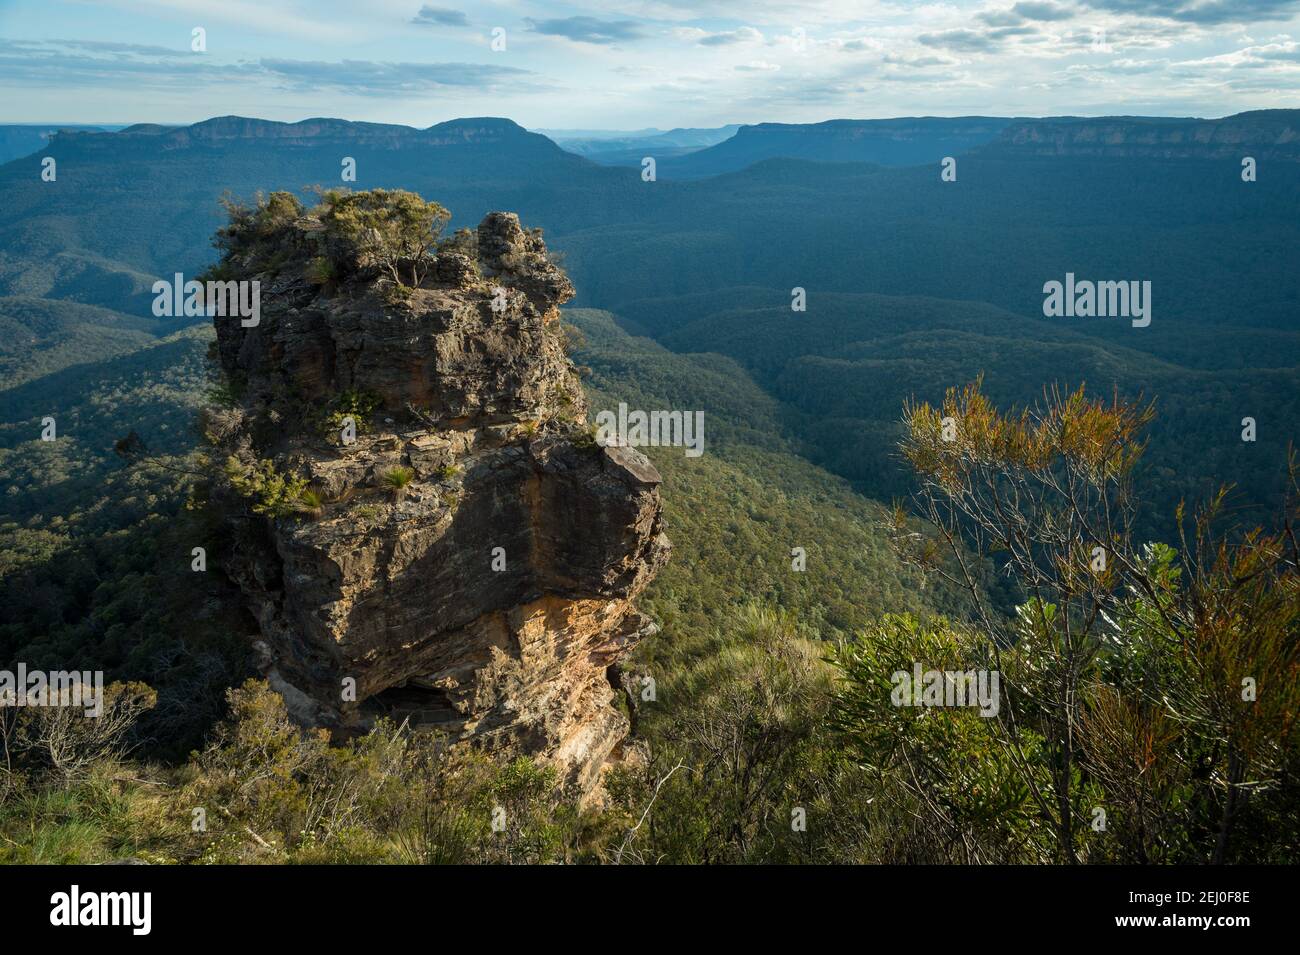 The Three Sisters Sandstone Rock Formation, Jamison Valley und Mount Solitary, Katoomba, Blue Mountains, New South Wales, Australien. Stockfoto